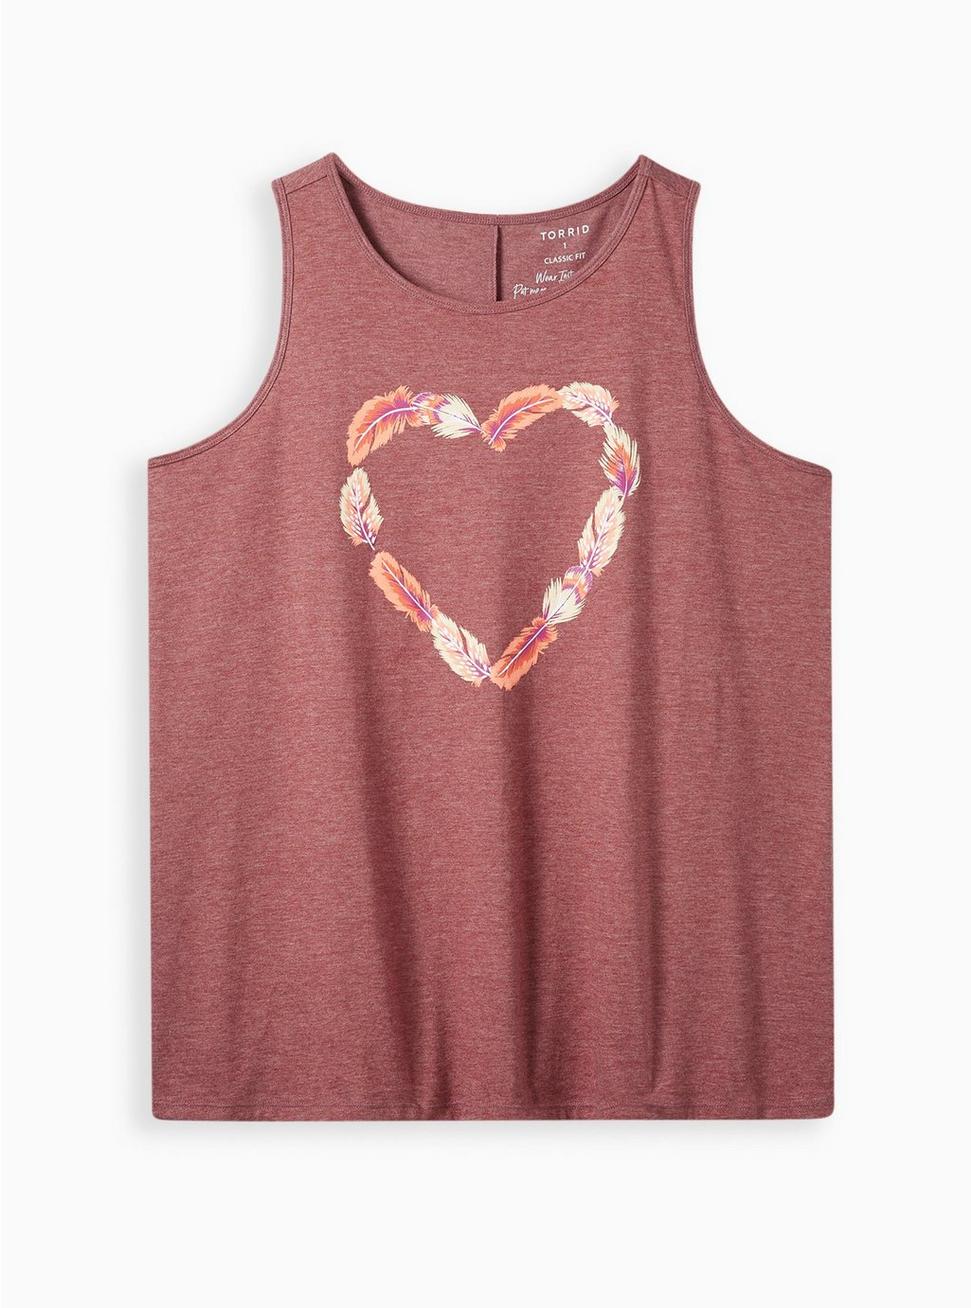 Everyday Tank - Signature Jersey Feather Heart Brown, MADDER BROWN, hi-res